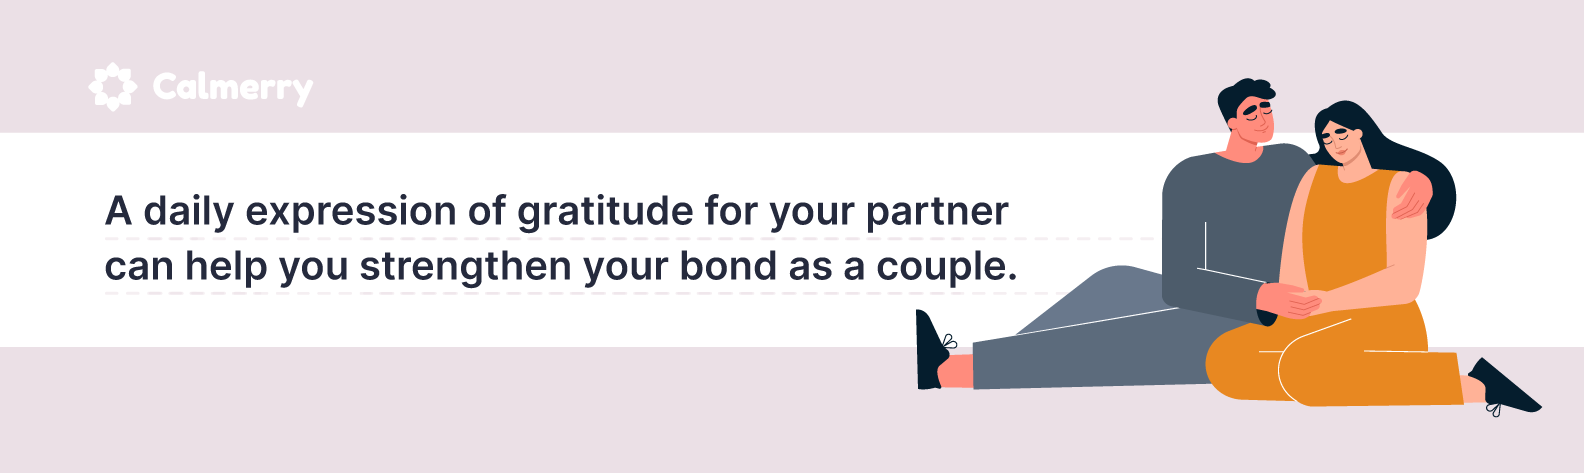 expressing gratitude to your partner